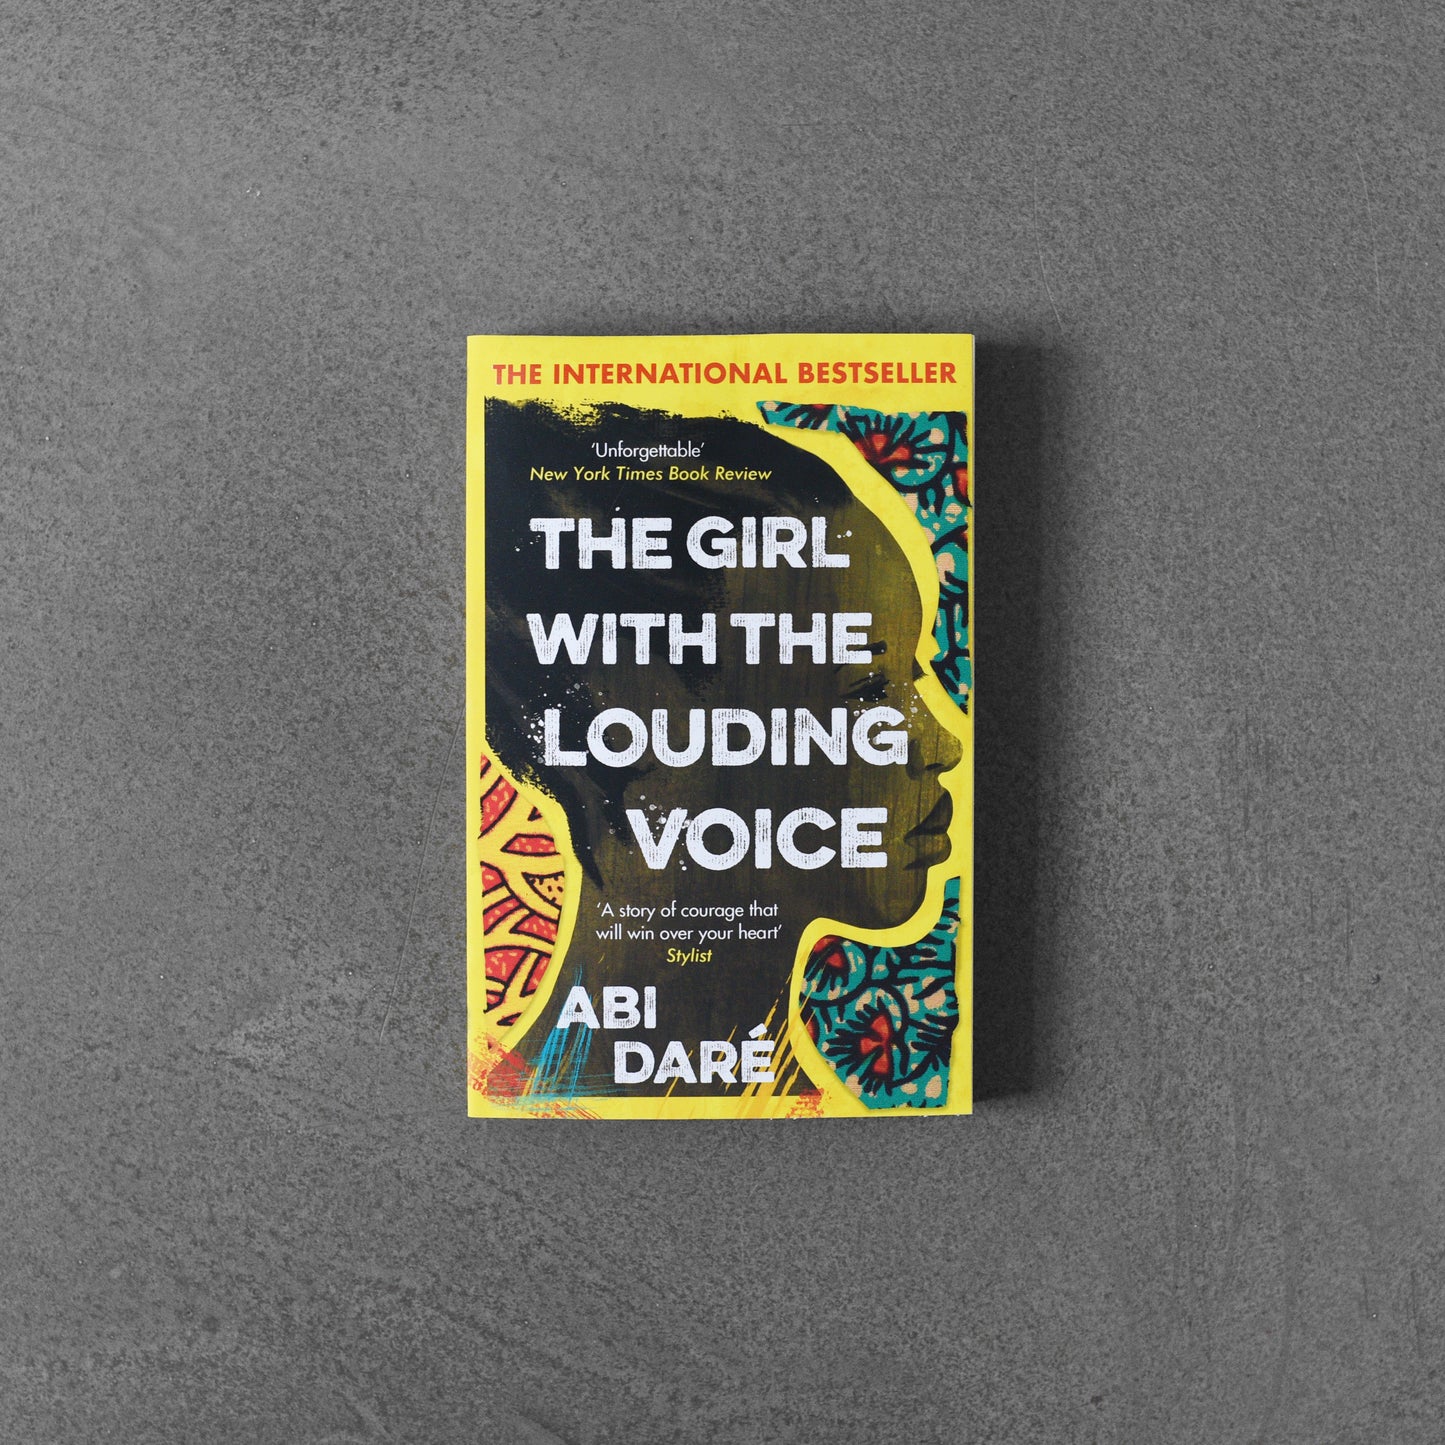 The Girl with the Louding Voice - Abi Daré